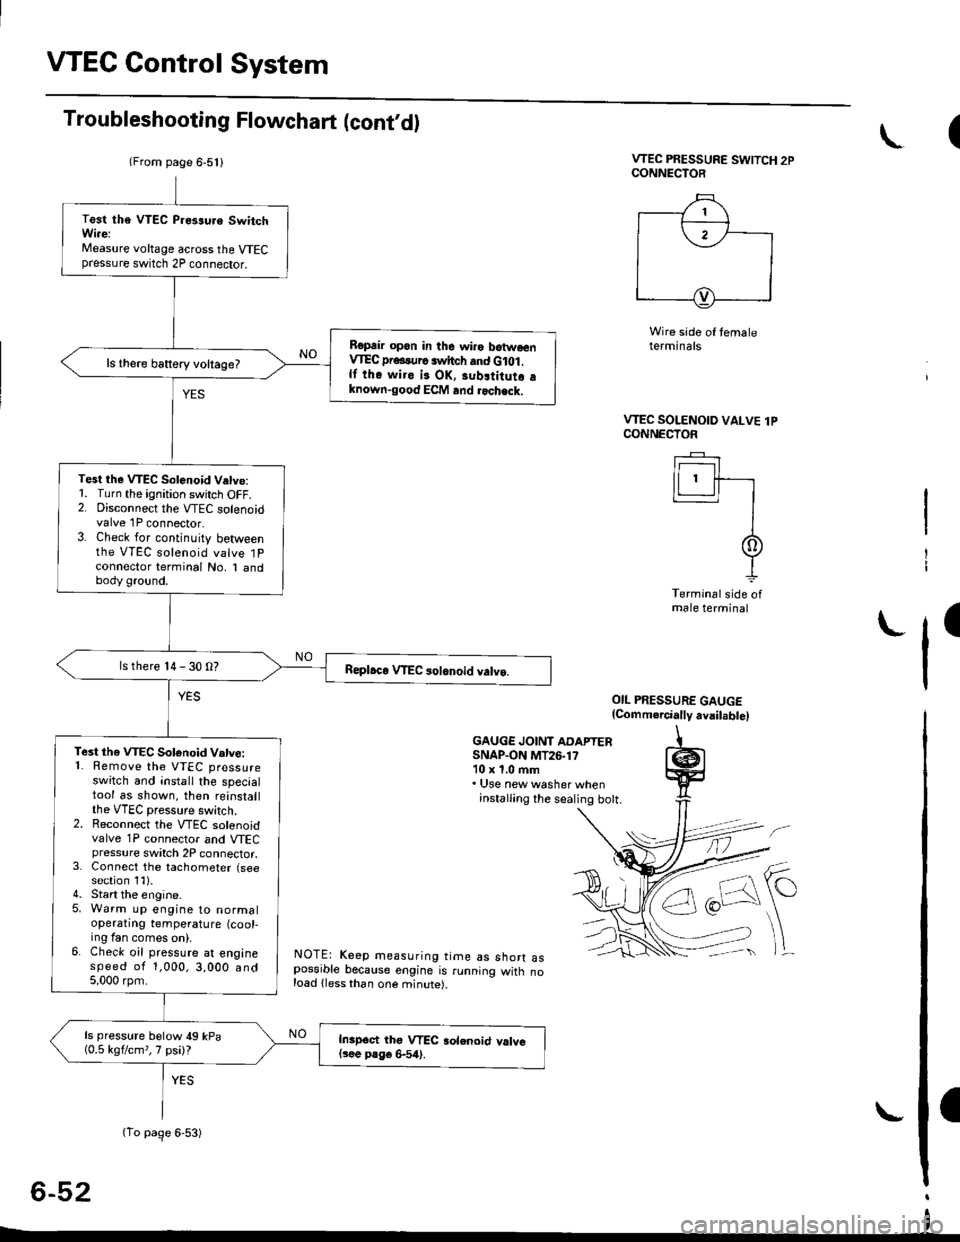 HONDA CIVIC 1999 6.G Workshop Manual VTEC Control System
Troubleshooting Flowchart (cont,d)
VTEC PRESSURE SWITCH 2PCONNECTOR
Wire side of temaleterminals
OIL PRESSURE GAUGE(Comm.rcially avail.bte)
GAUGE JOINT ADAPTERSNAP.ON MT26.1710 x 1